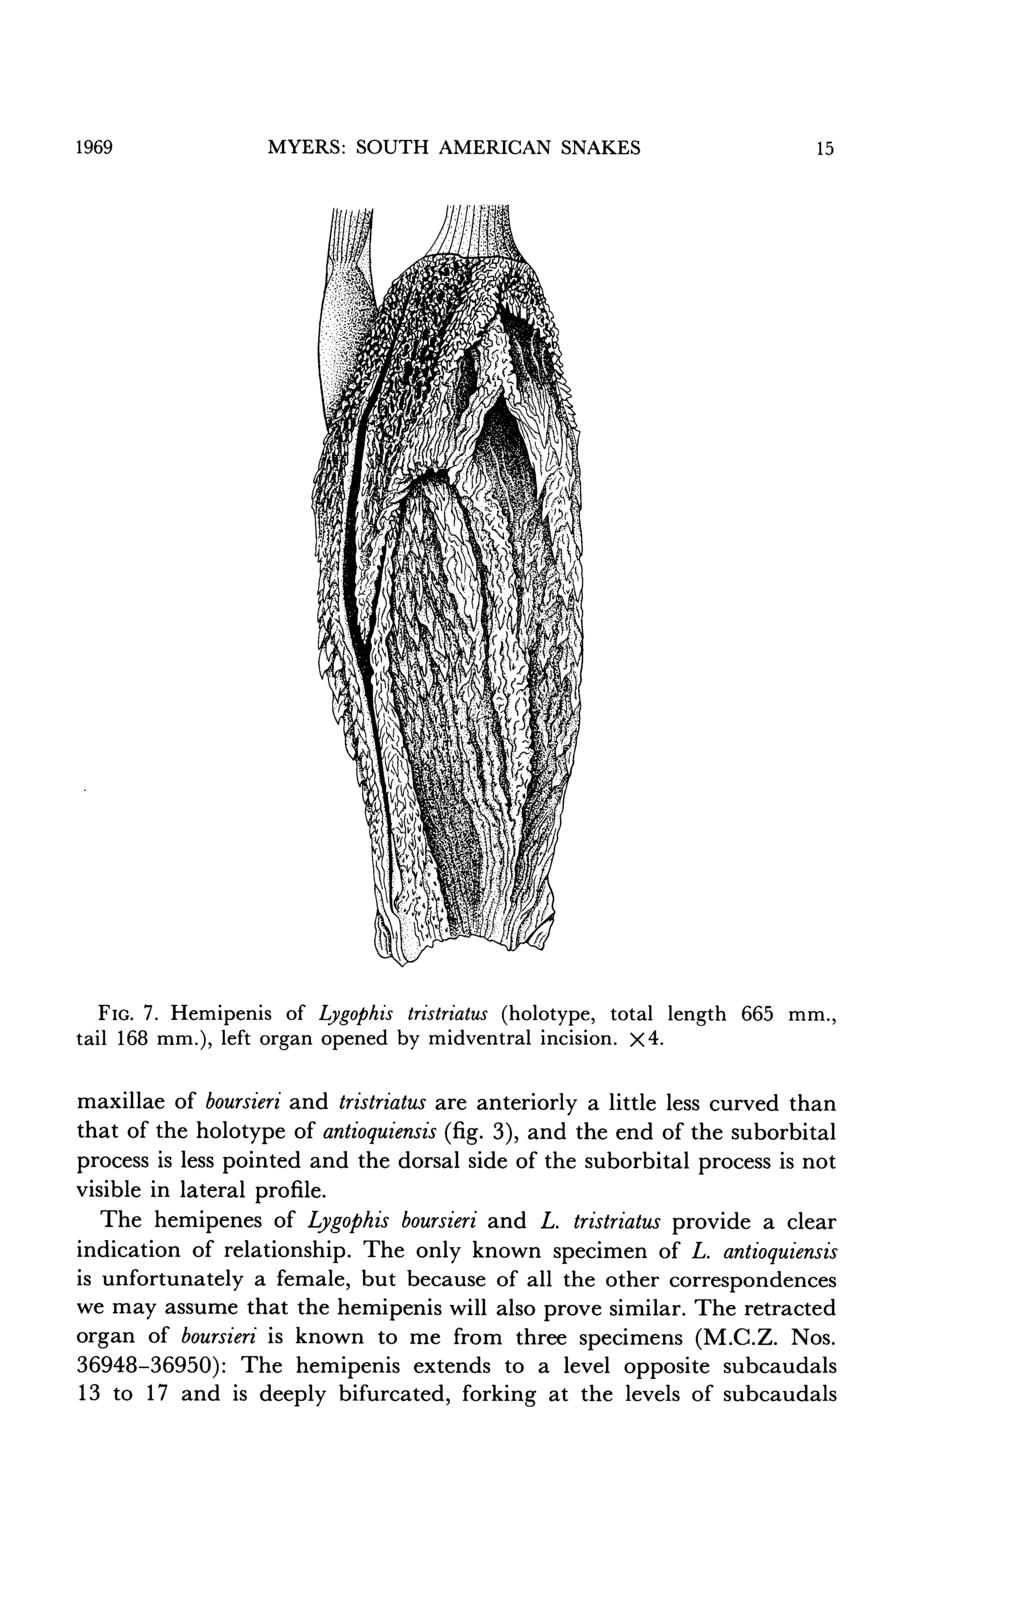 1969 MYERS: SOUTH AMERICAN SNAKES 15 FIG. 7. Hemipenis of Lygophis tristriatus (holotype, total length 665 mm., tail 168 mm.), left organ opened by midventral incision. X4.